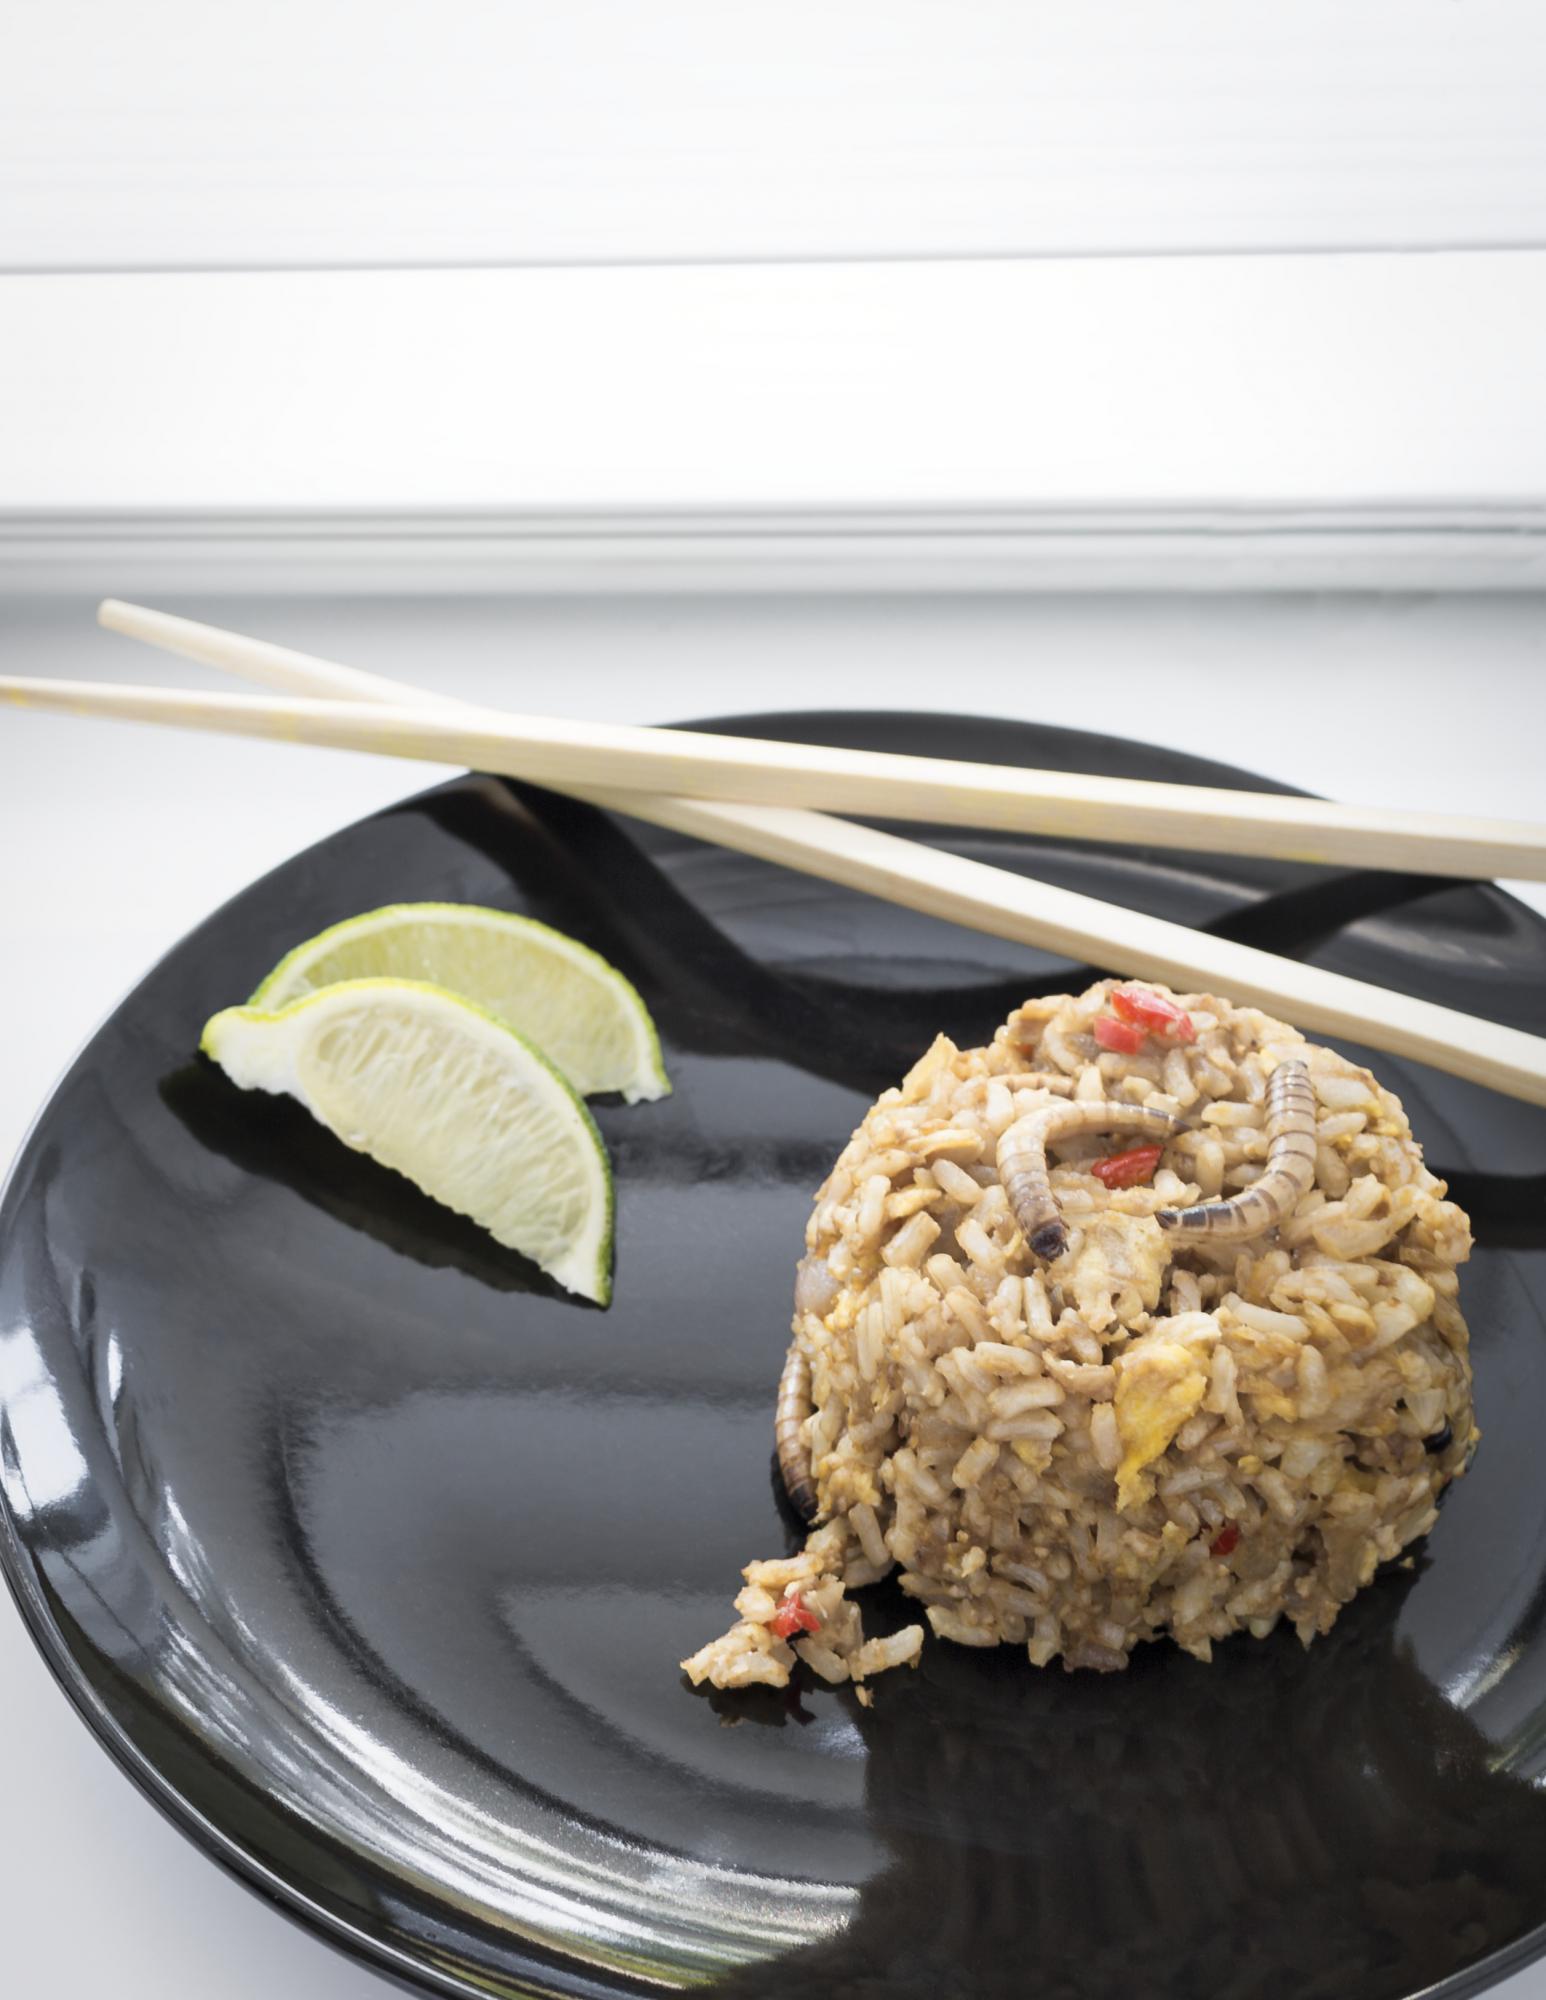 Mealworm fried rice. Recipe below. Photograph by Justin Barrett. 